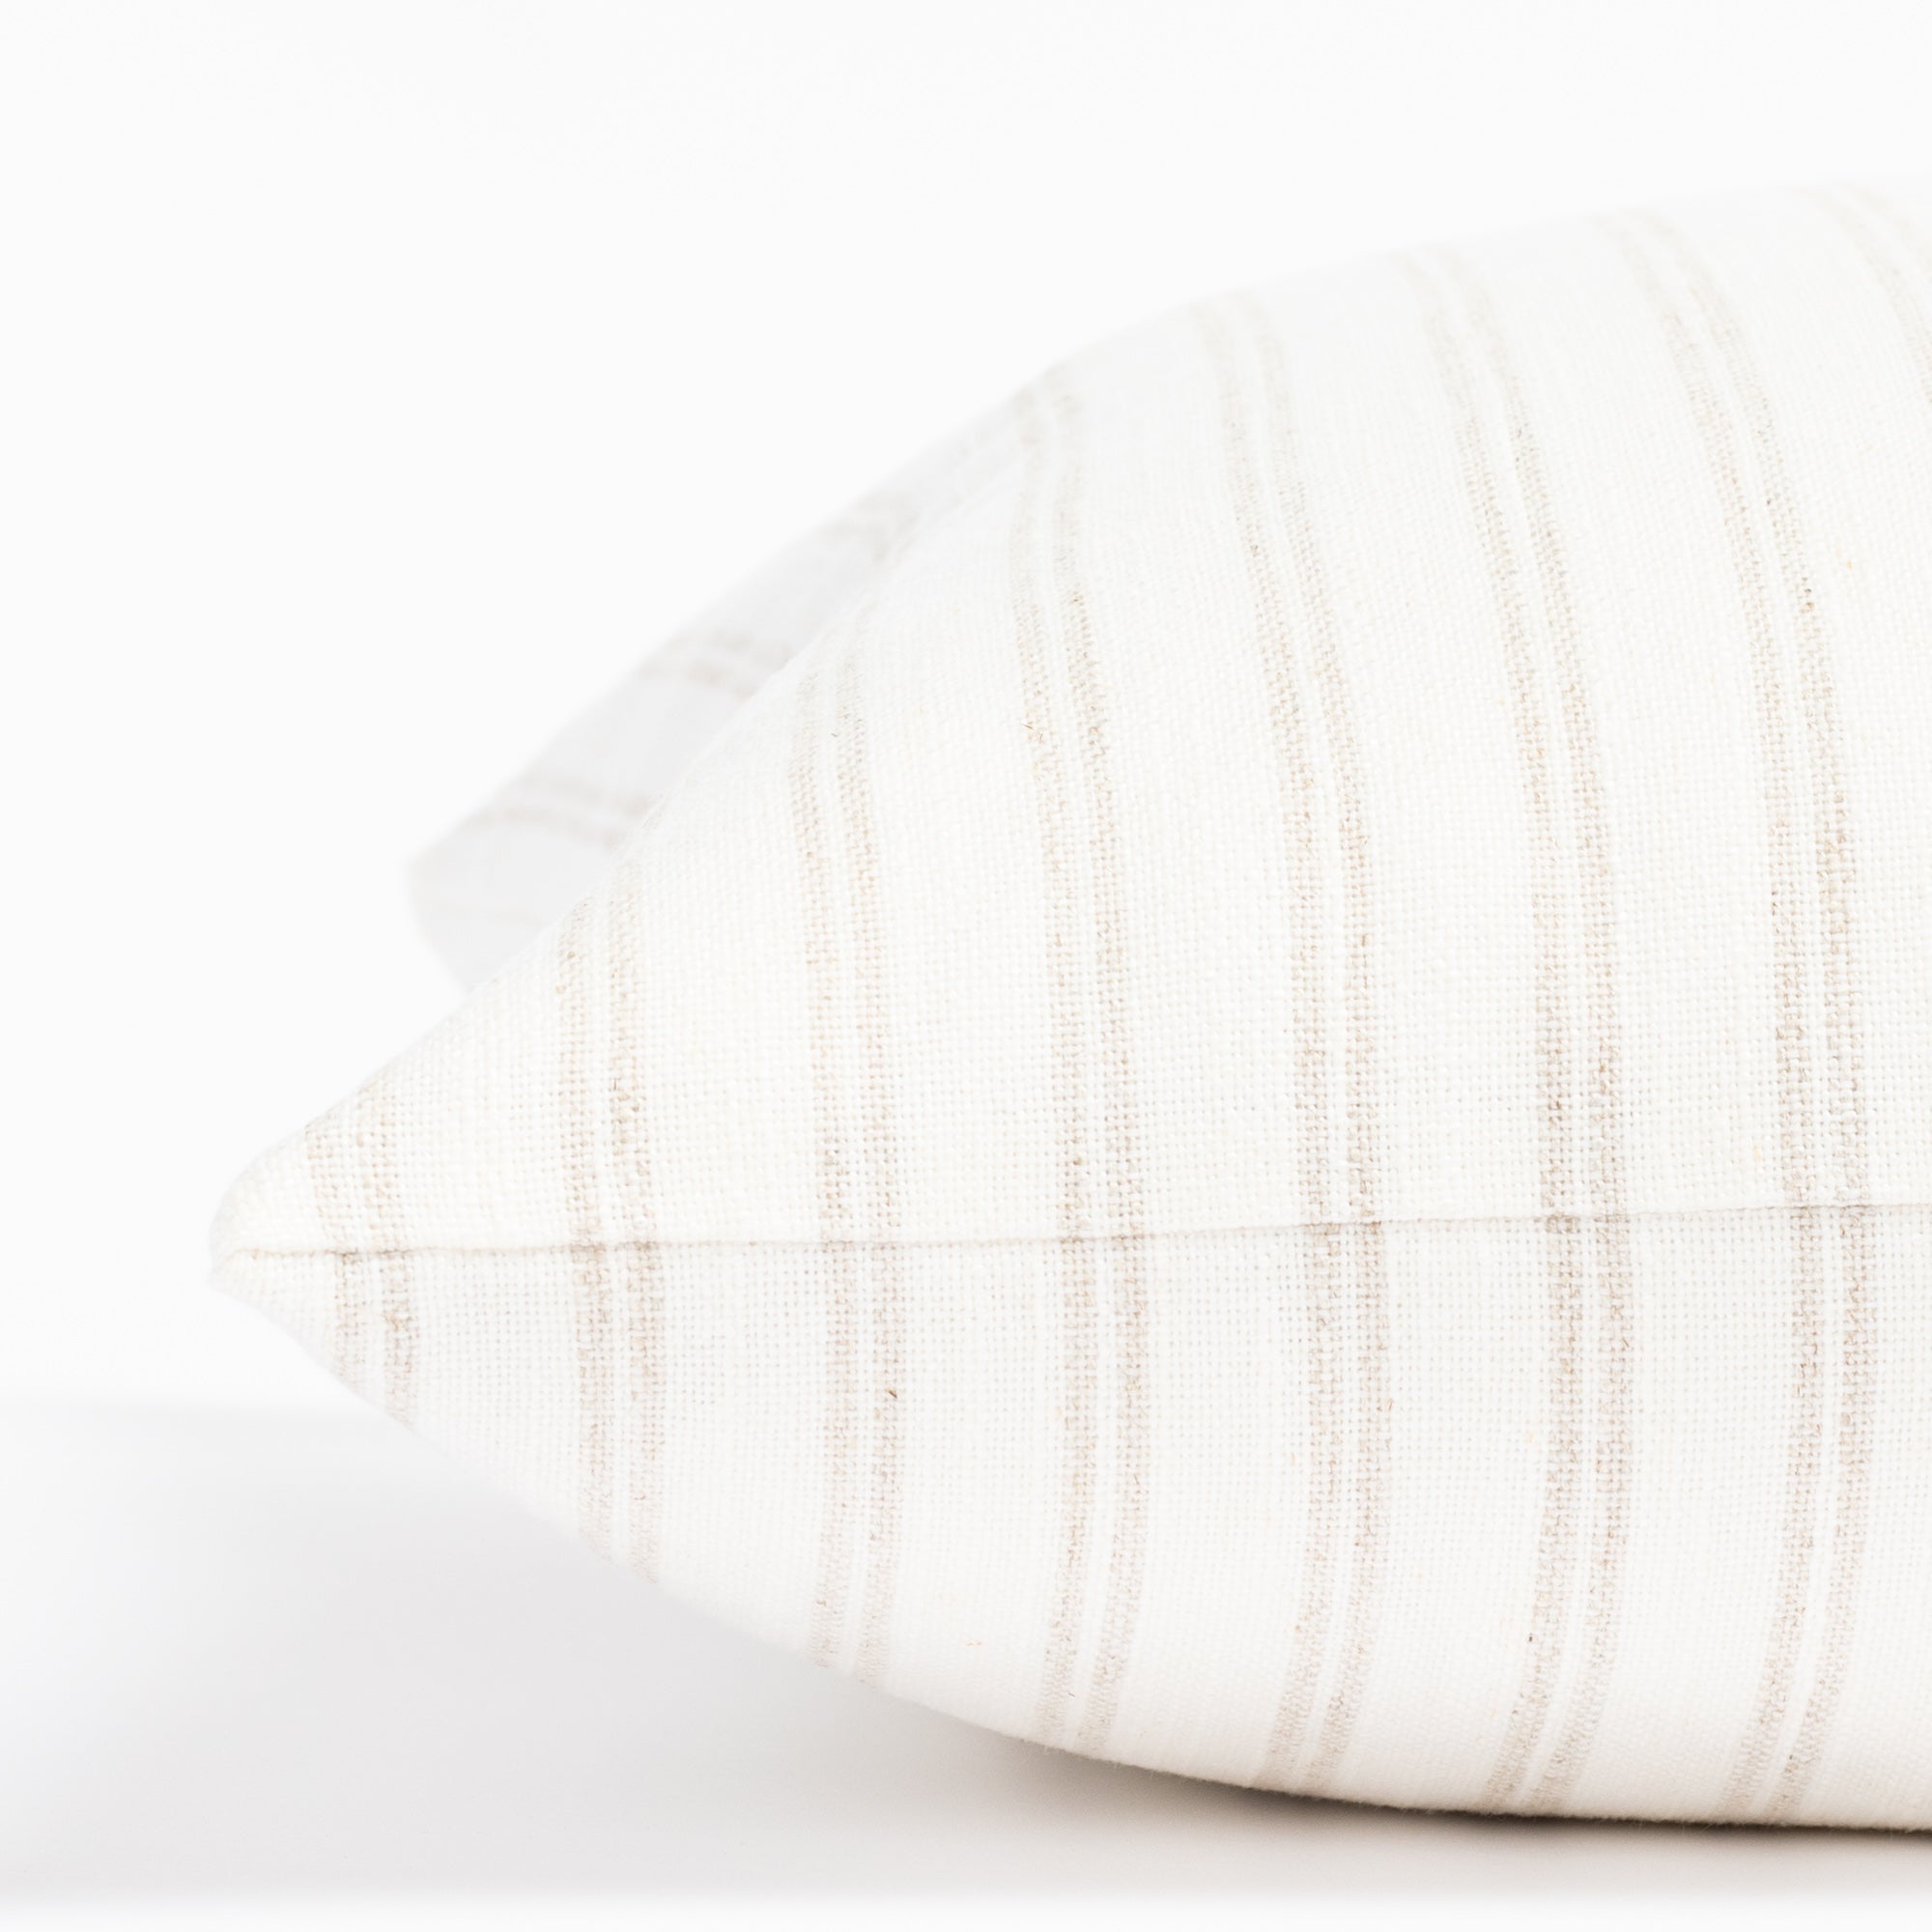 a soft white and beige vertical stripe style throw pillow : close up side view